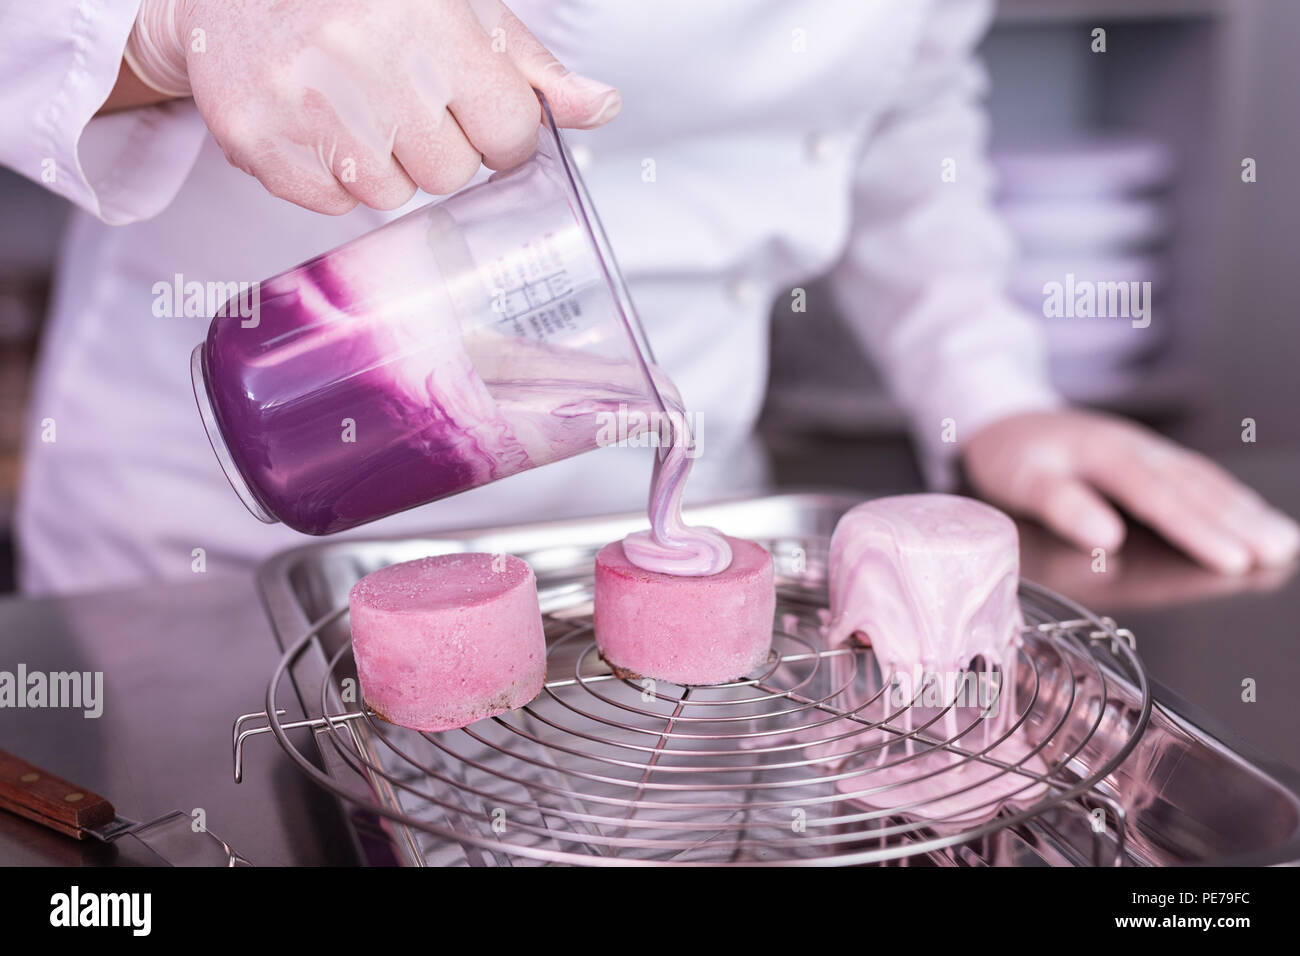 Experienced baker pouring nice violet mirror icing on little cakes Stock Photo